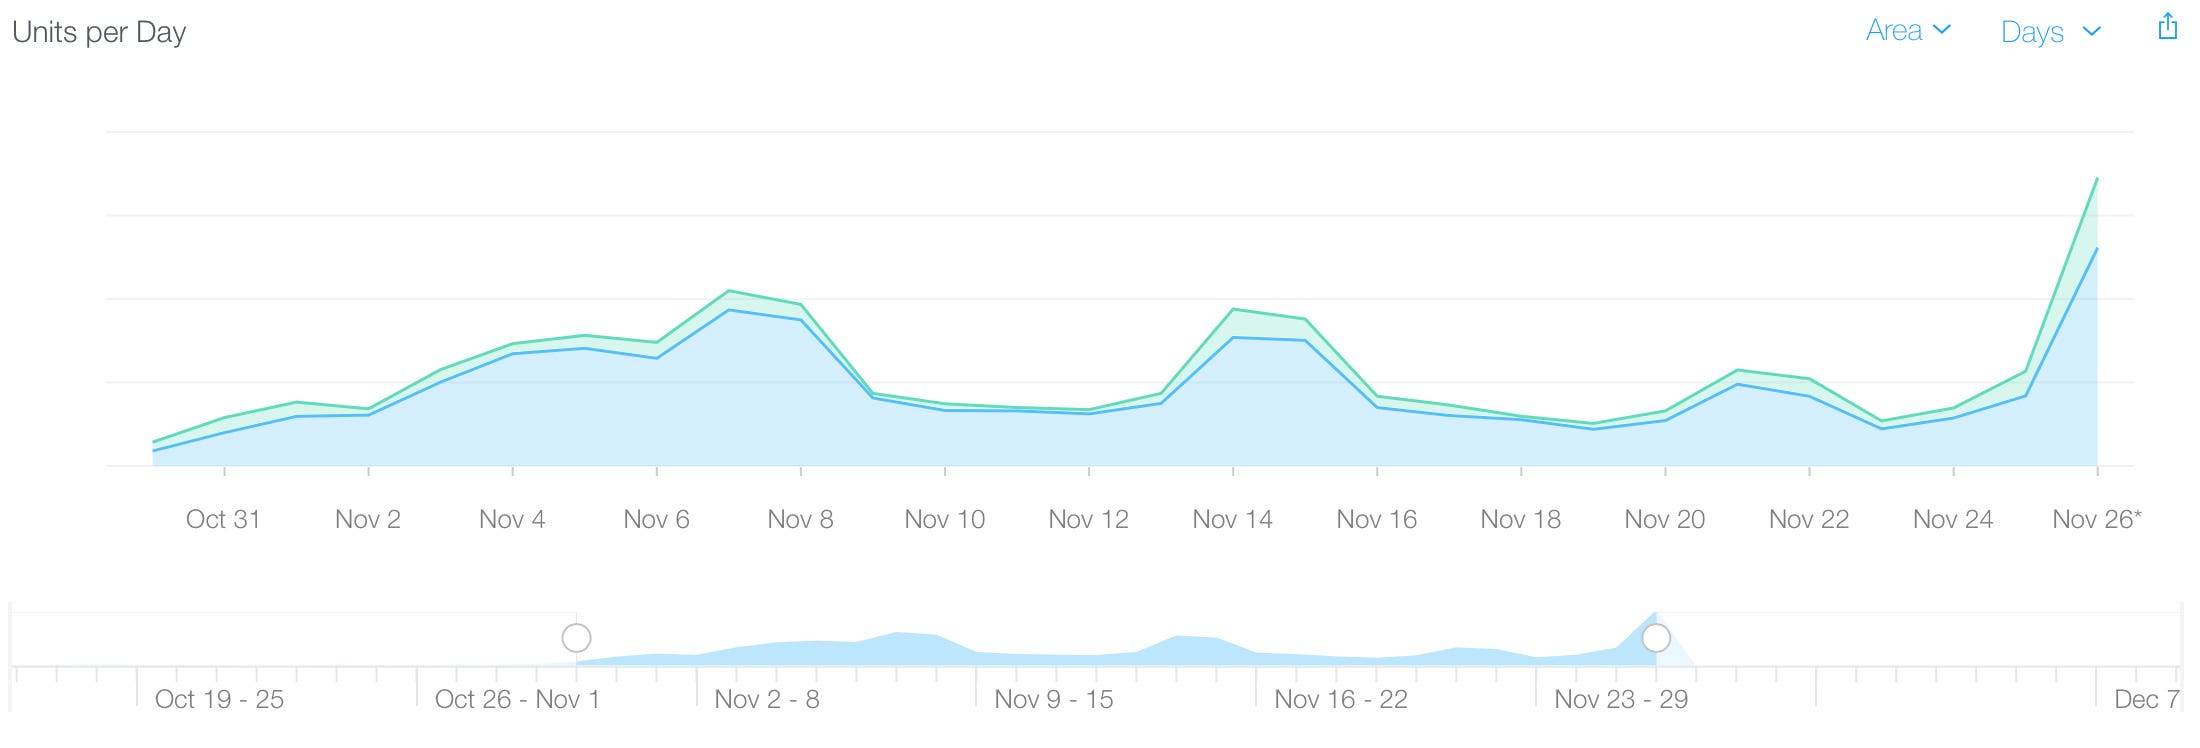 The spike at the end is for Thanksgiving. It made for a nice boost, even if it is temporary.